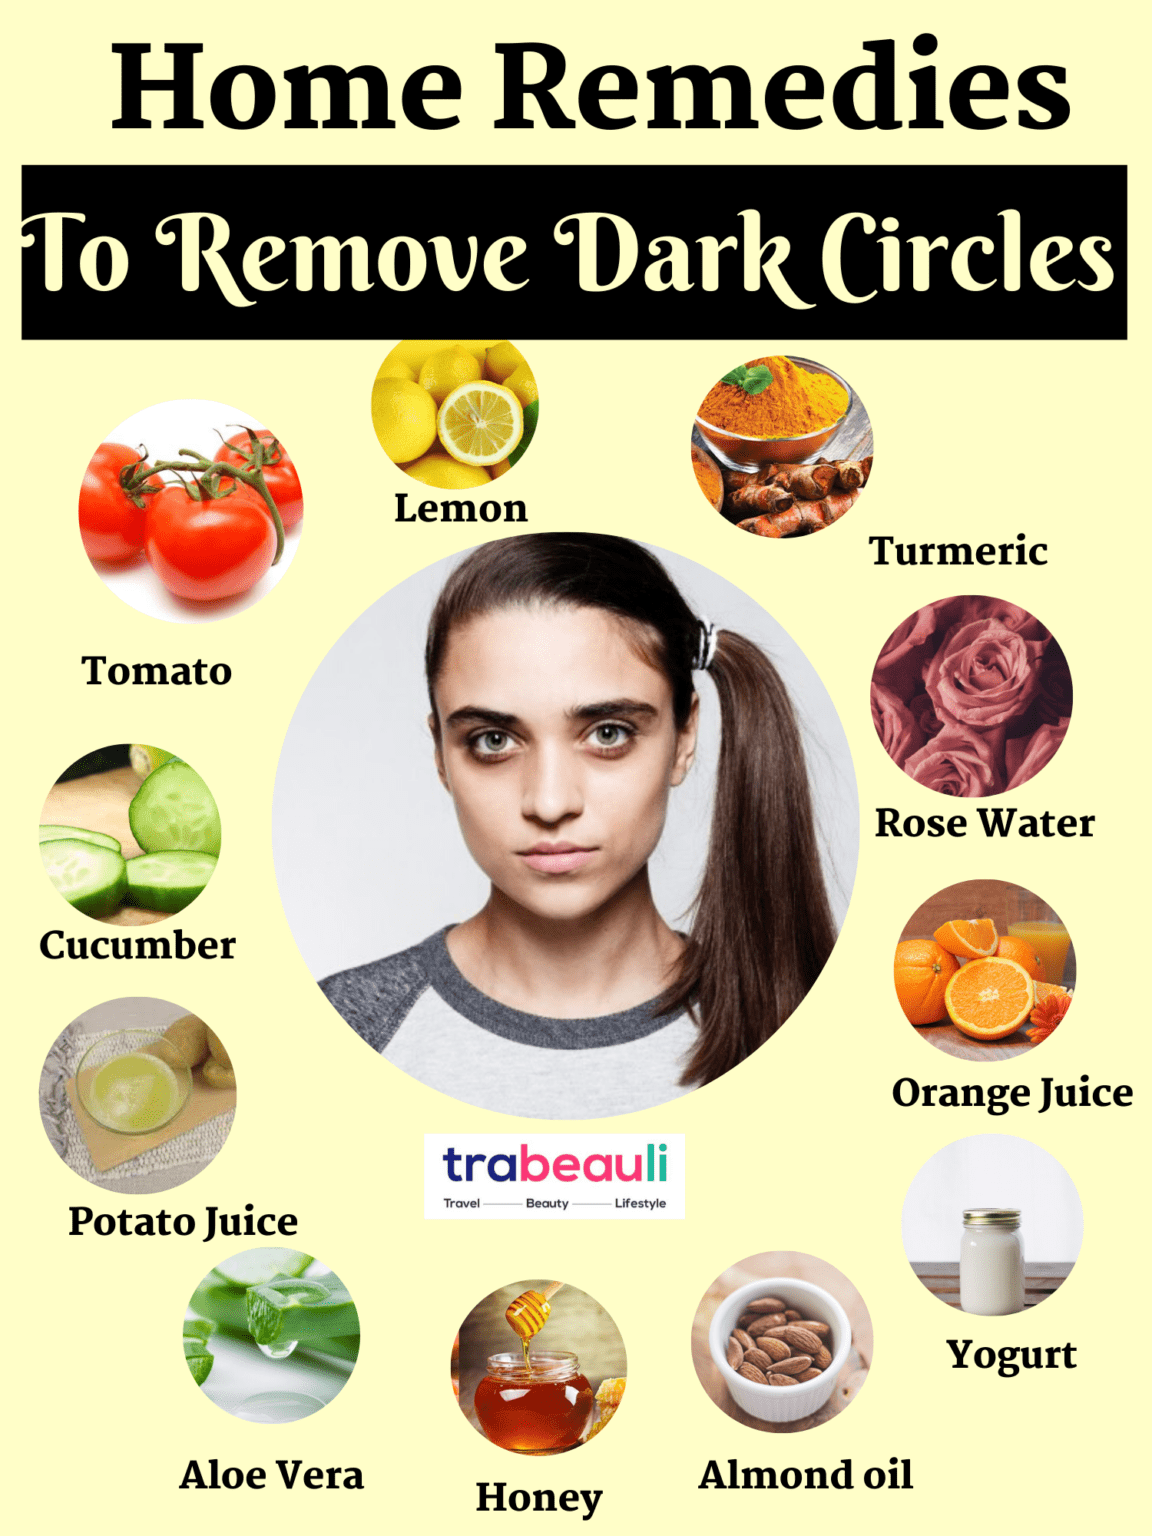 How To Get Rid Of Dark Circles At Home (Overnight) | Trabeauli -   18 how to get rid of dark circles under eye ideas